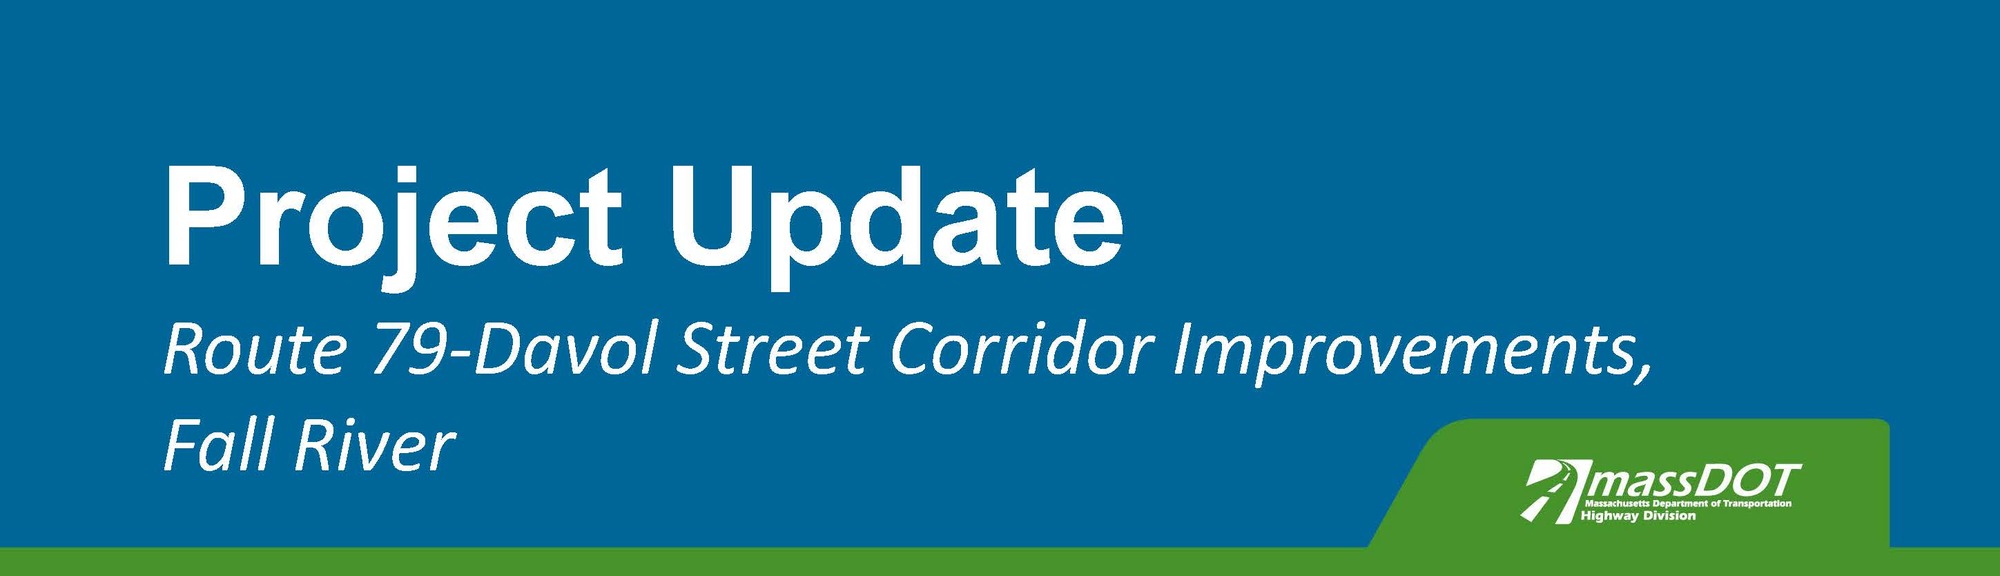 Project update for the Route 79-Davol Street Corridor Improvements, Fall River